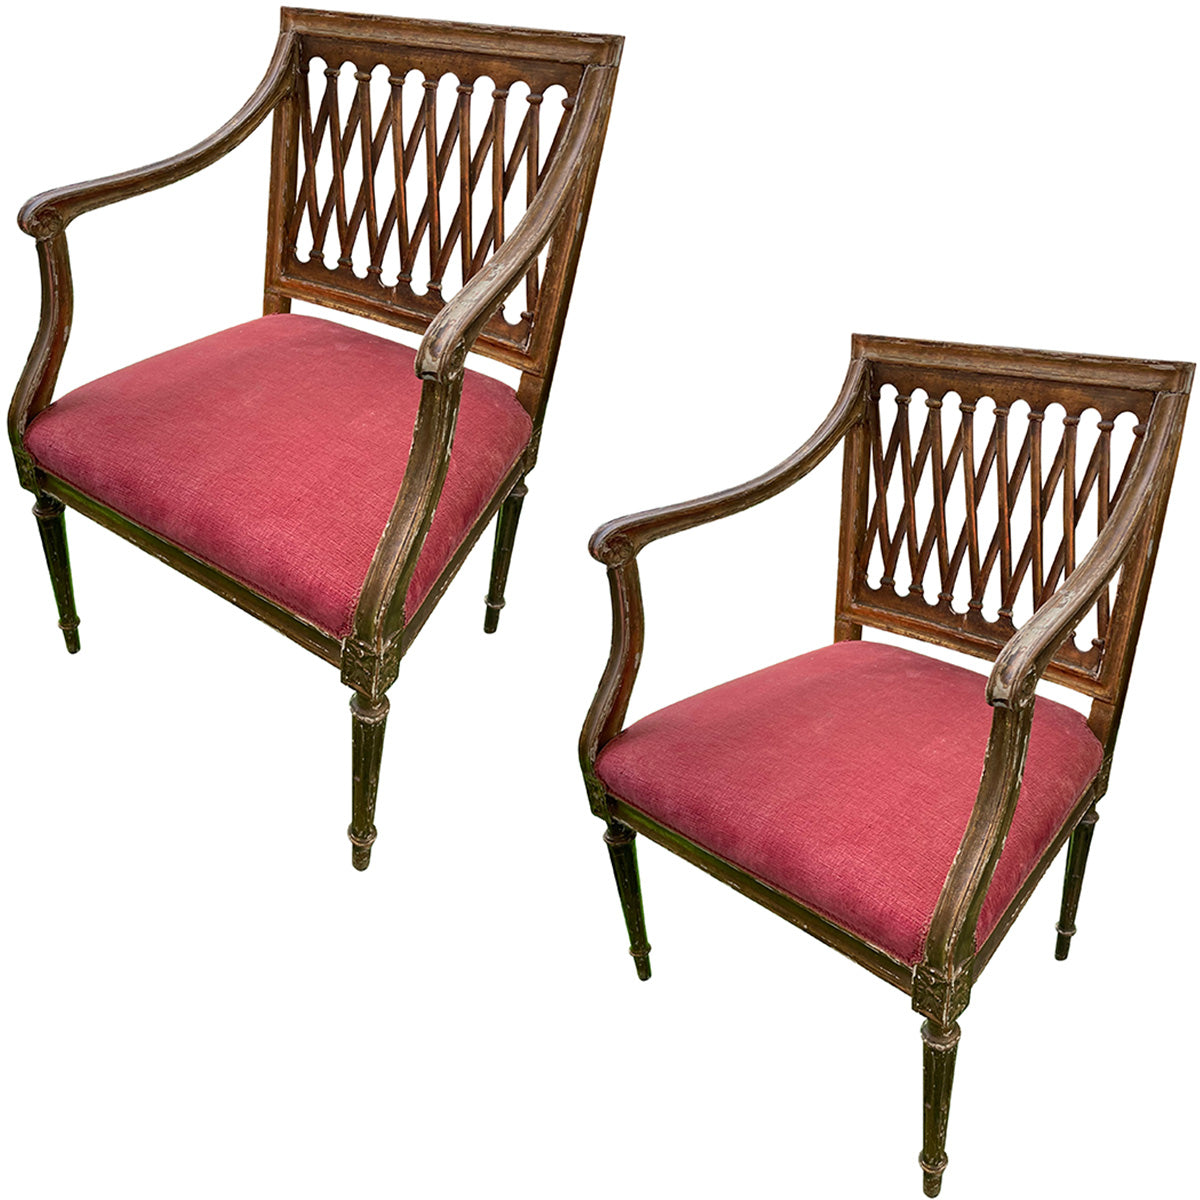 Pair of Regency Carved and Gilded Arm Chairs